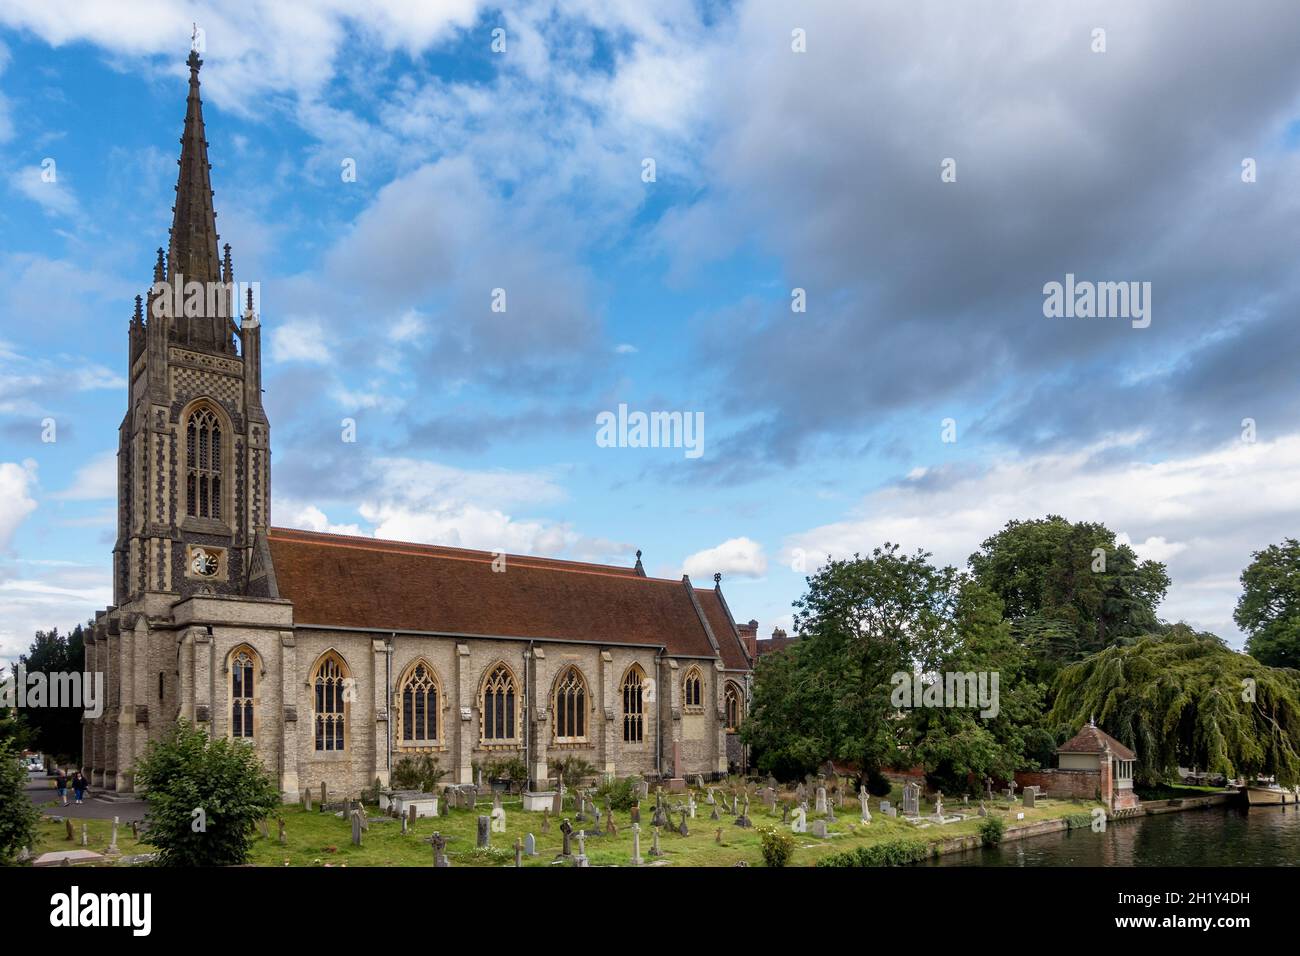 All Saints Church and churchyard next to the River Thames in Marlow, Buckinghamshire, England. Stock Photo